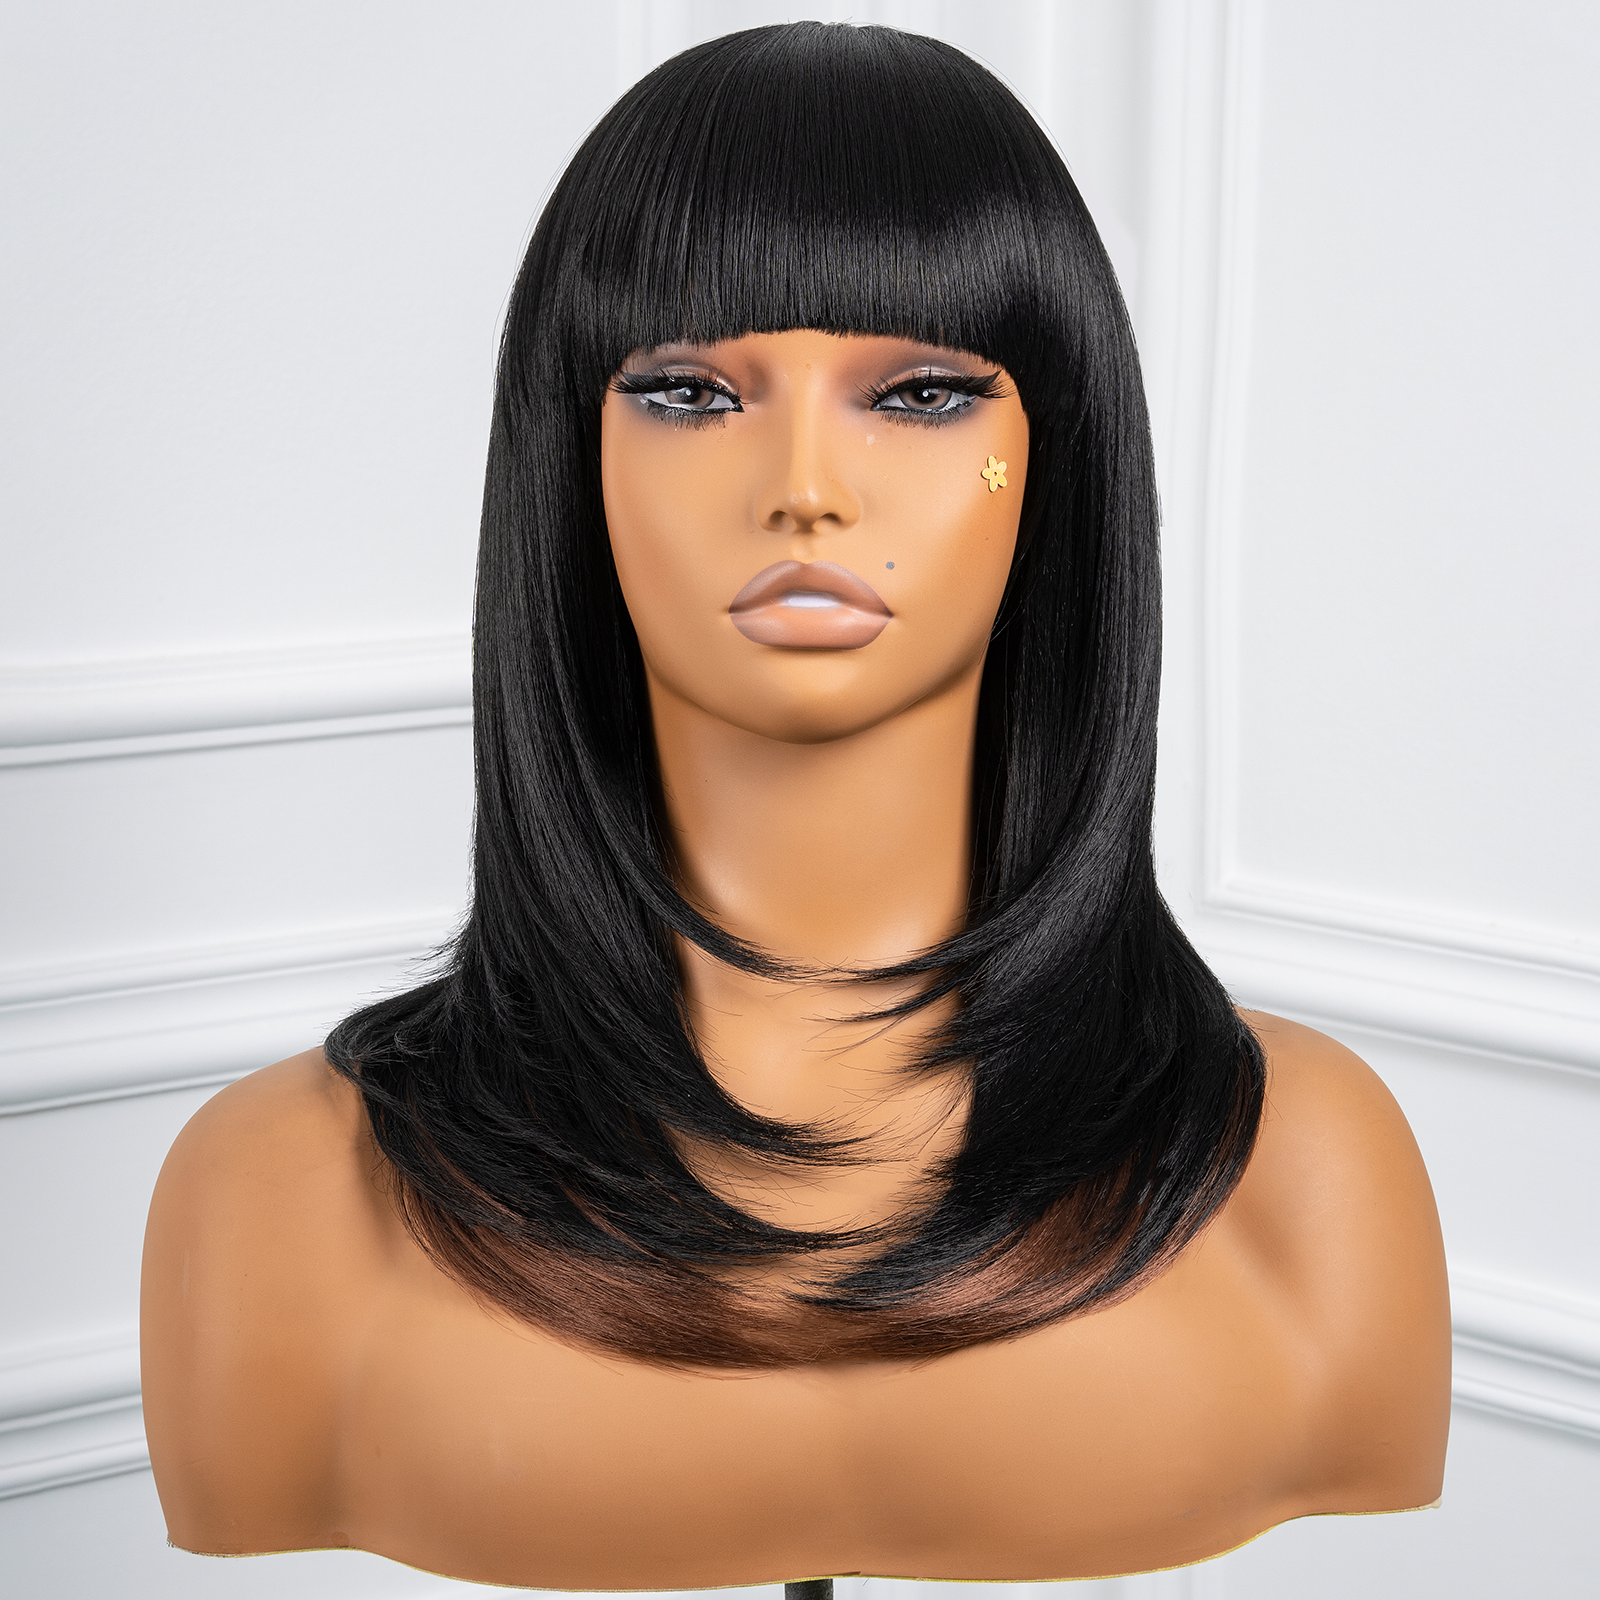 Toyotress  Shoulder-Length Layered Wigs With Bangs -10 Inch Natural Black Mid-Length Wavy Wigs For Black Women, Heat Resistant Synthetic Hair Replacement Wigs (BZ-10)